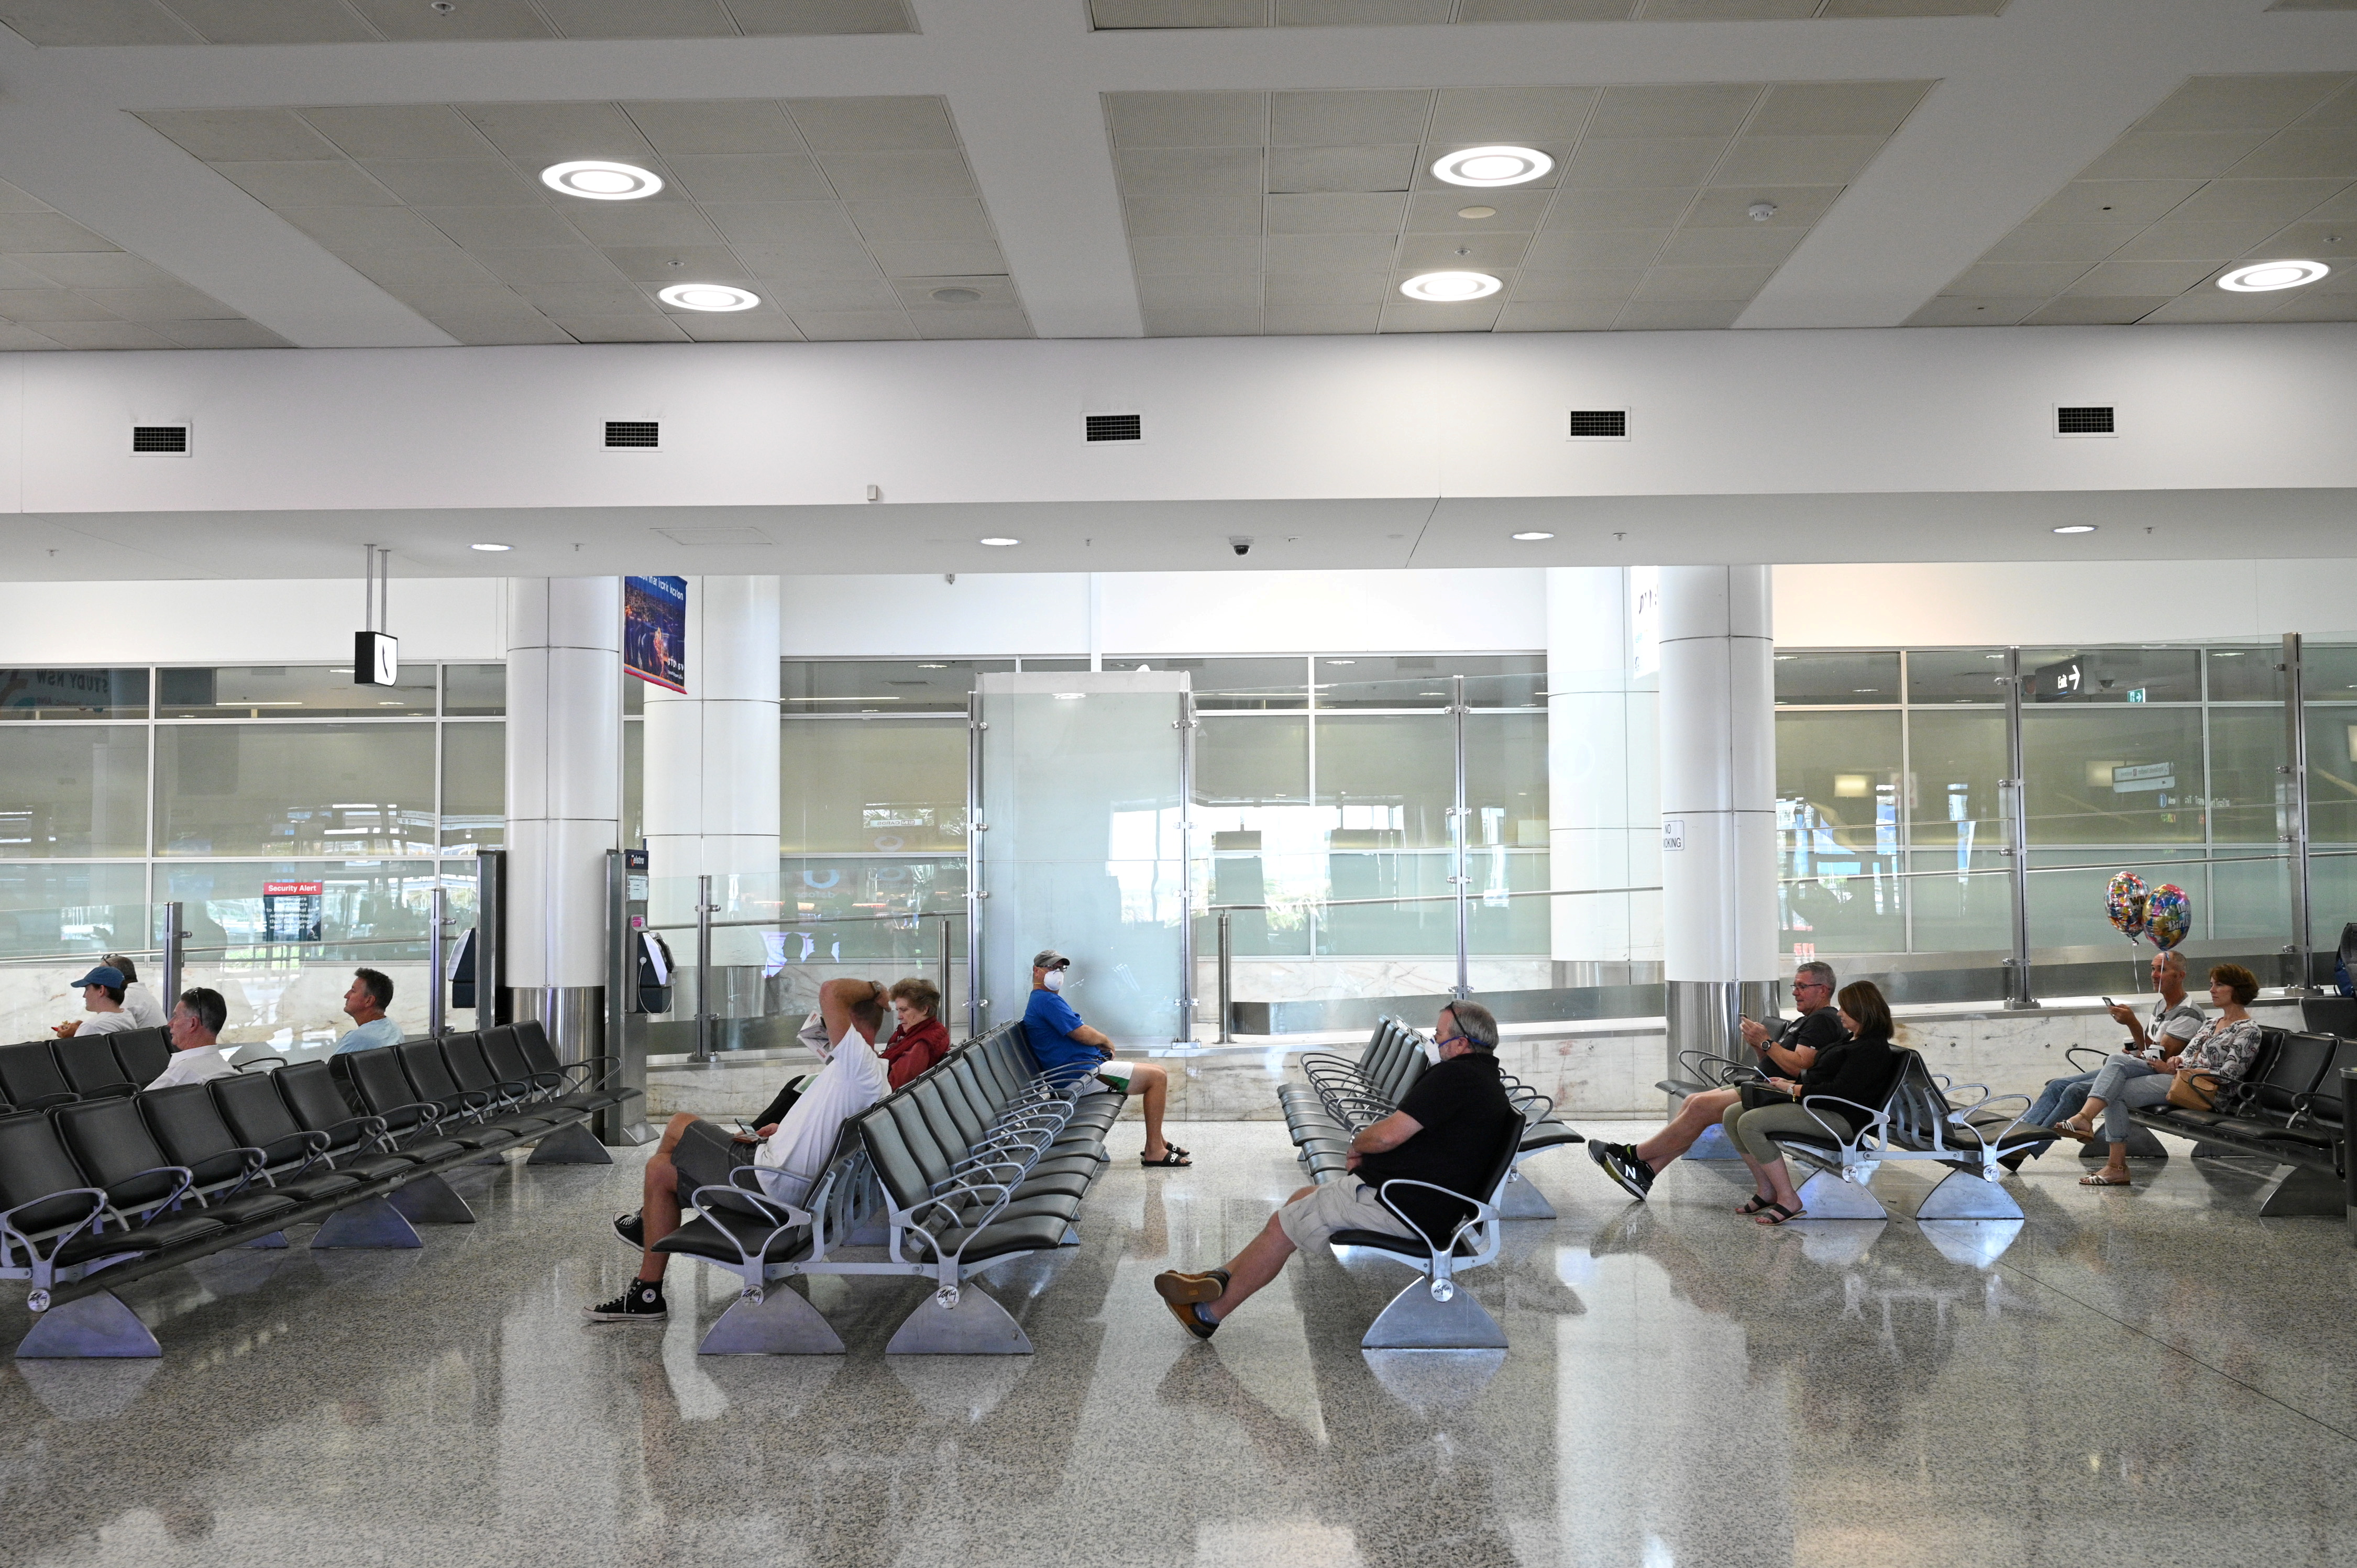 The international arrivals area at Kingsford Smith International Airport is seen after Australia implemented an entry ban on non-citizens and non-residents due to the coronavirus disease (COVID-19) in Sydney